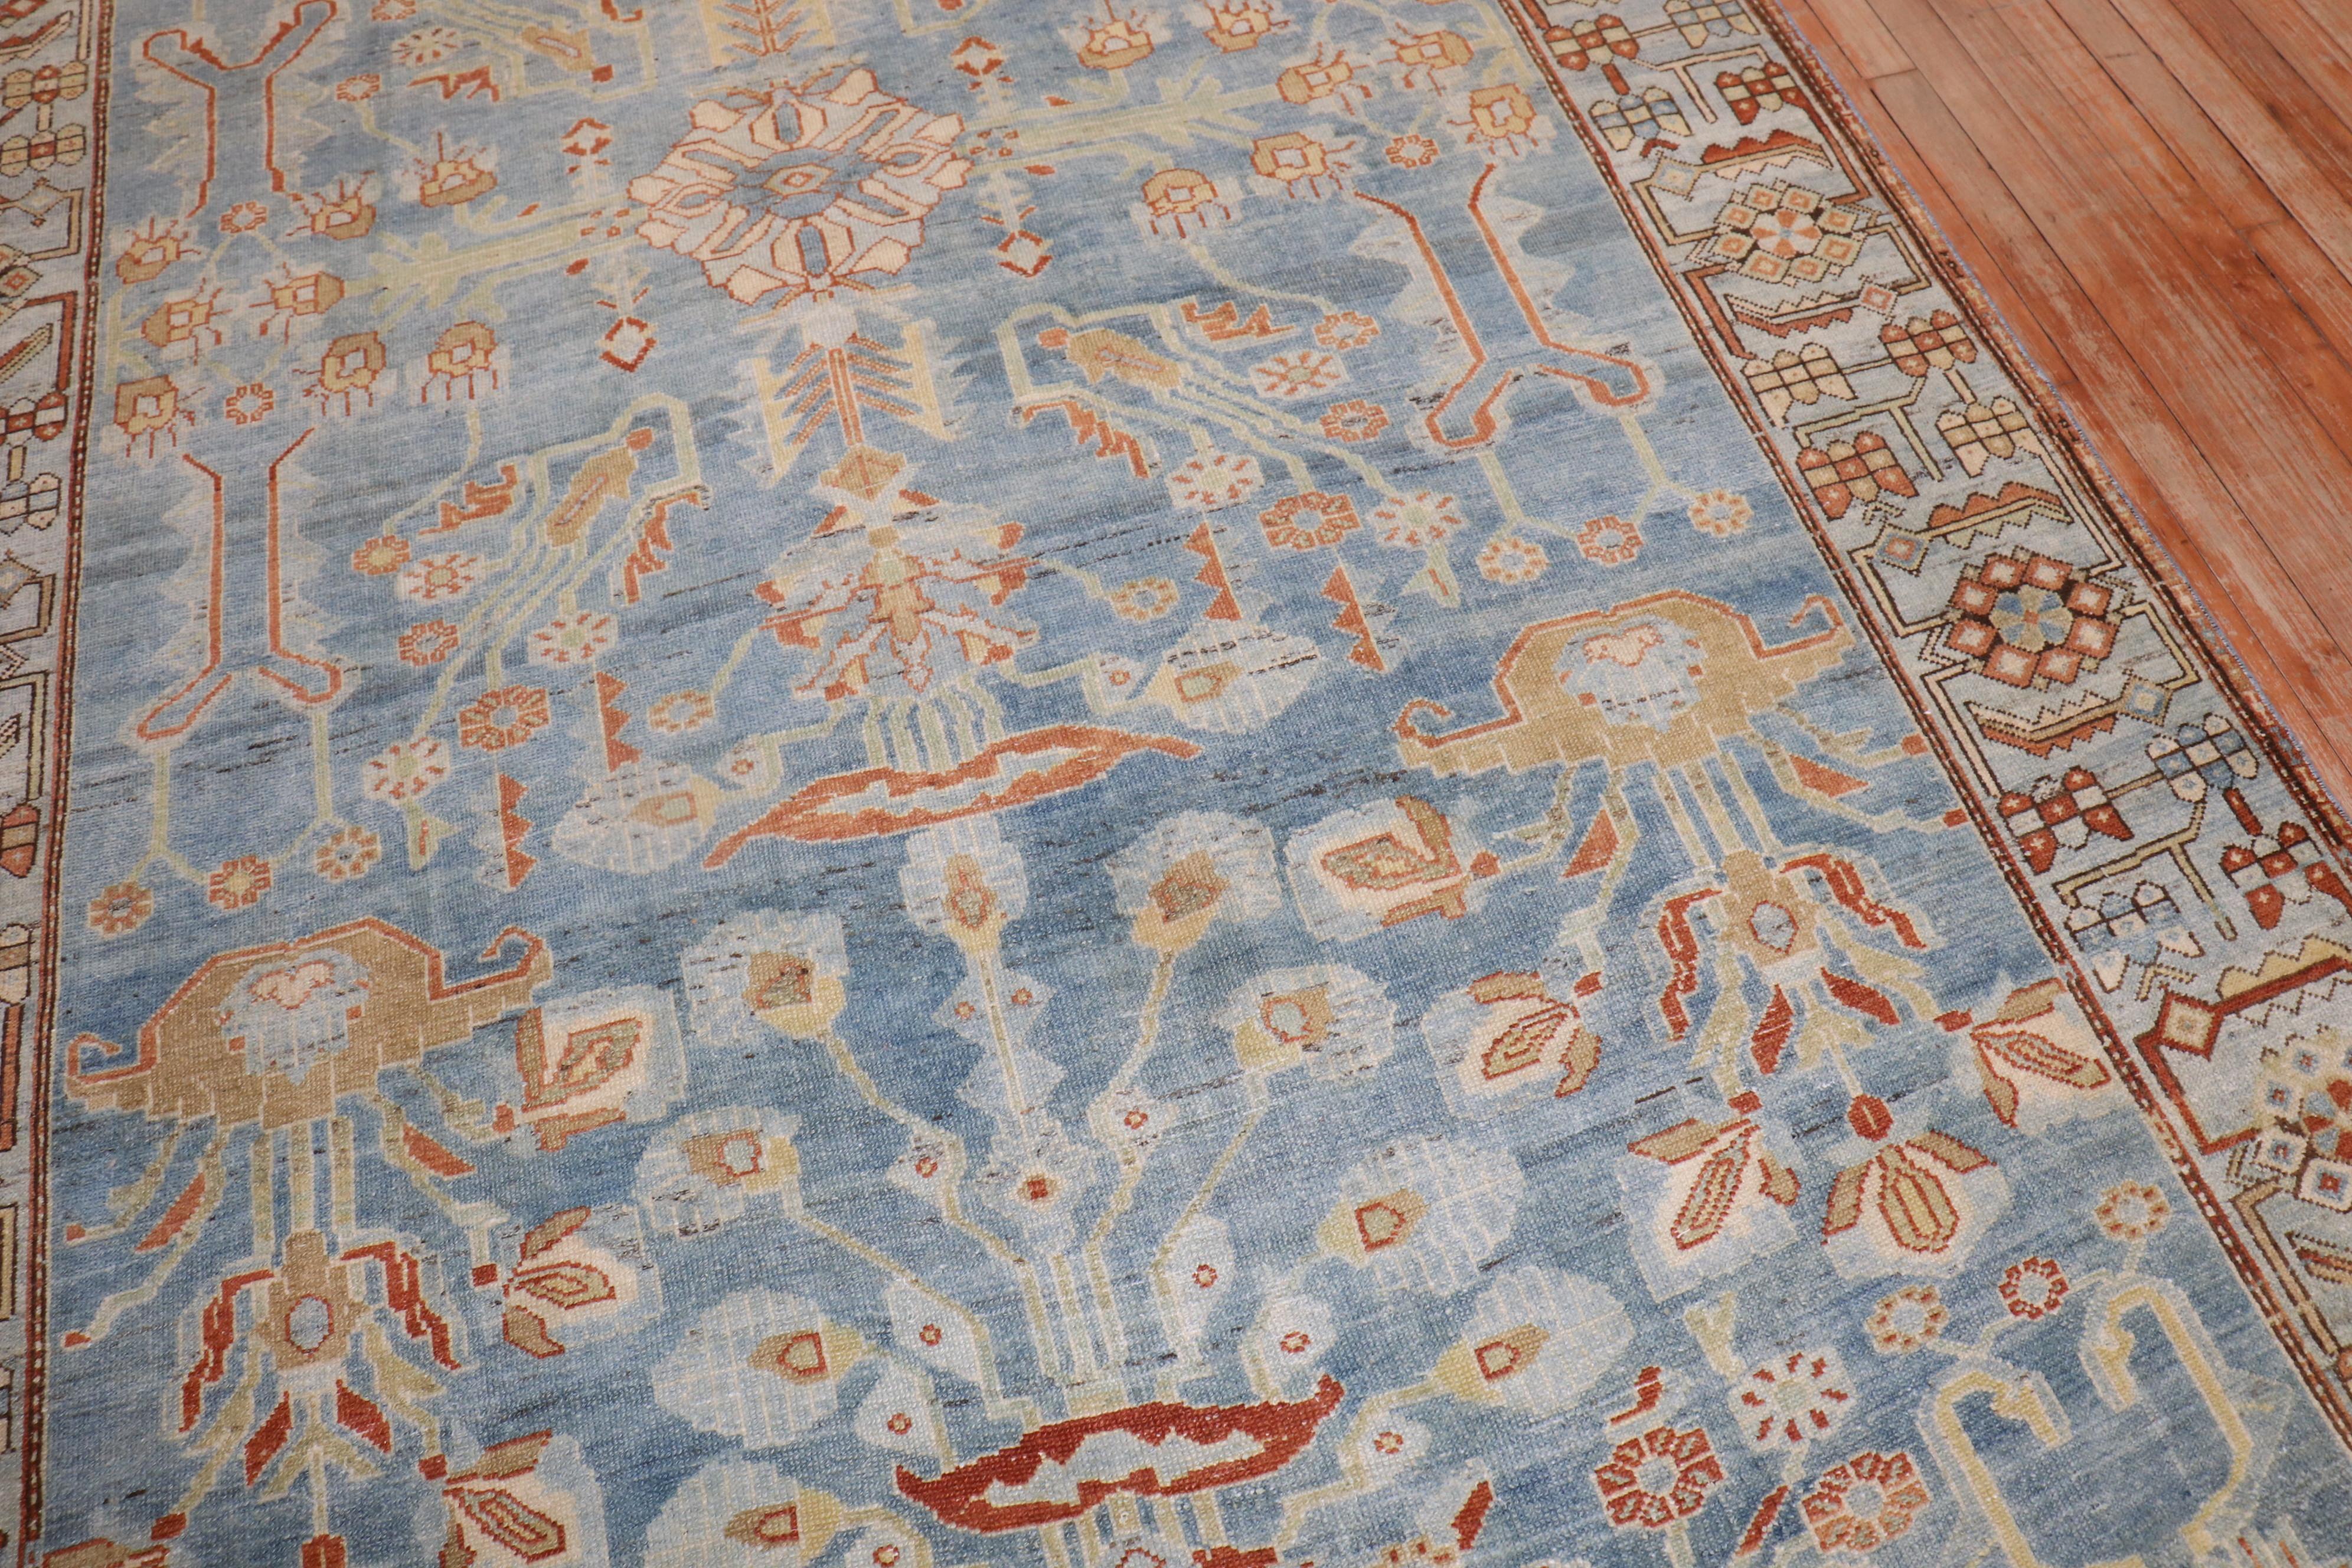 An early 20th century Persian Malayer Rug in gallery format

size 6' 4